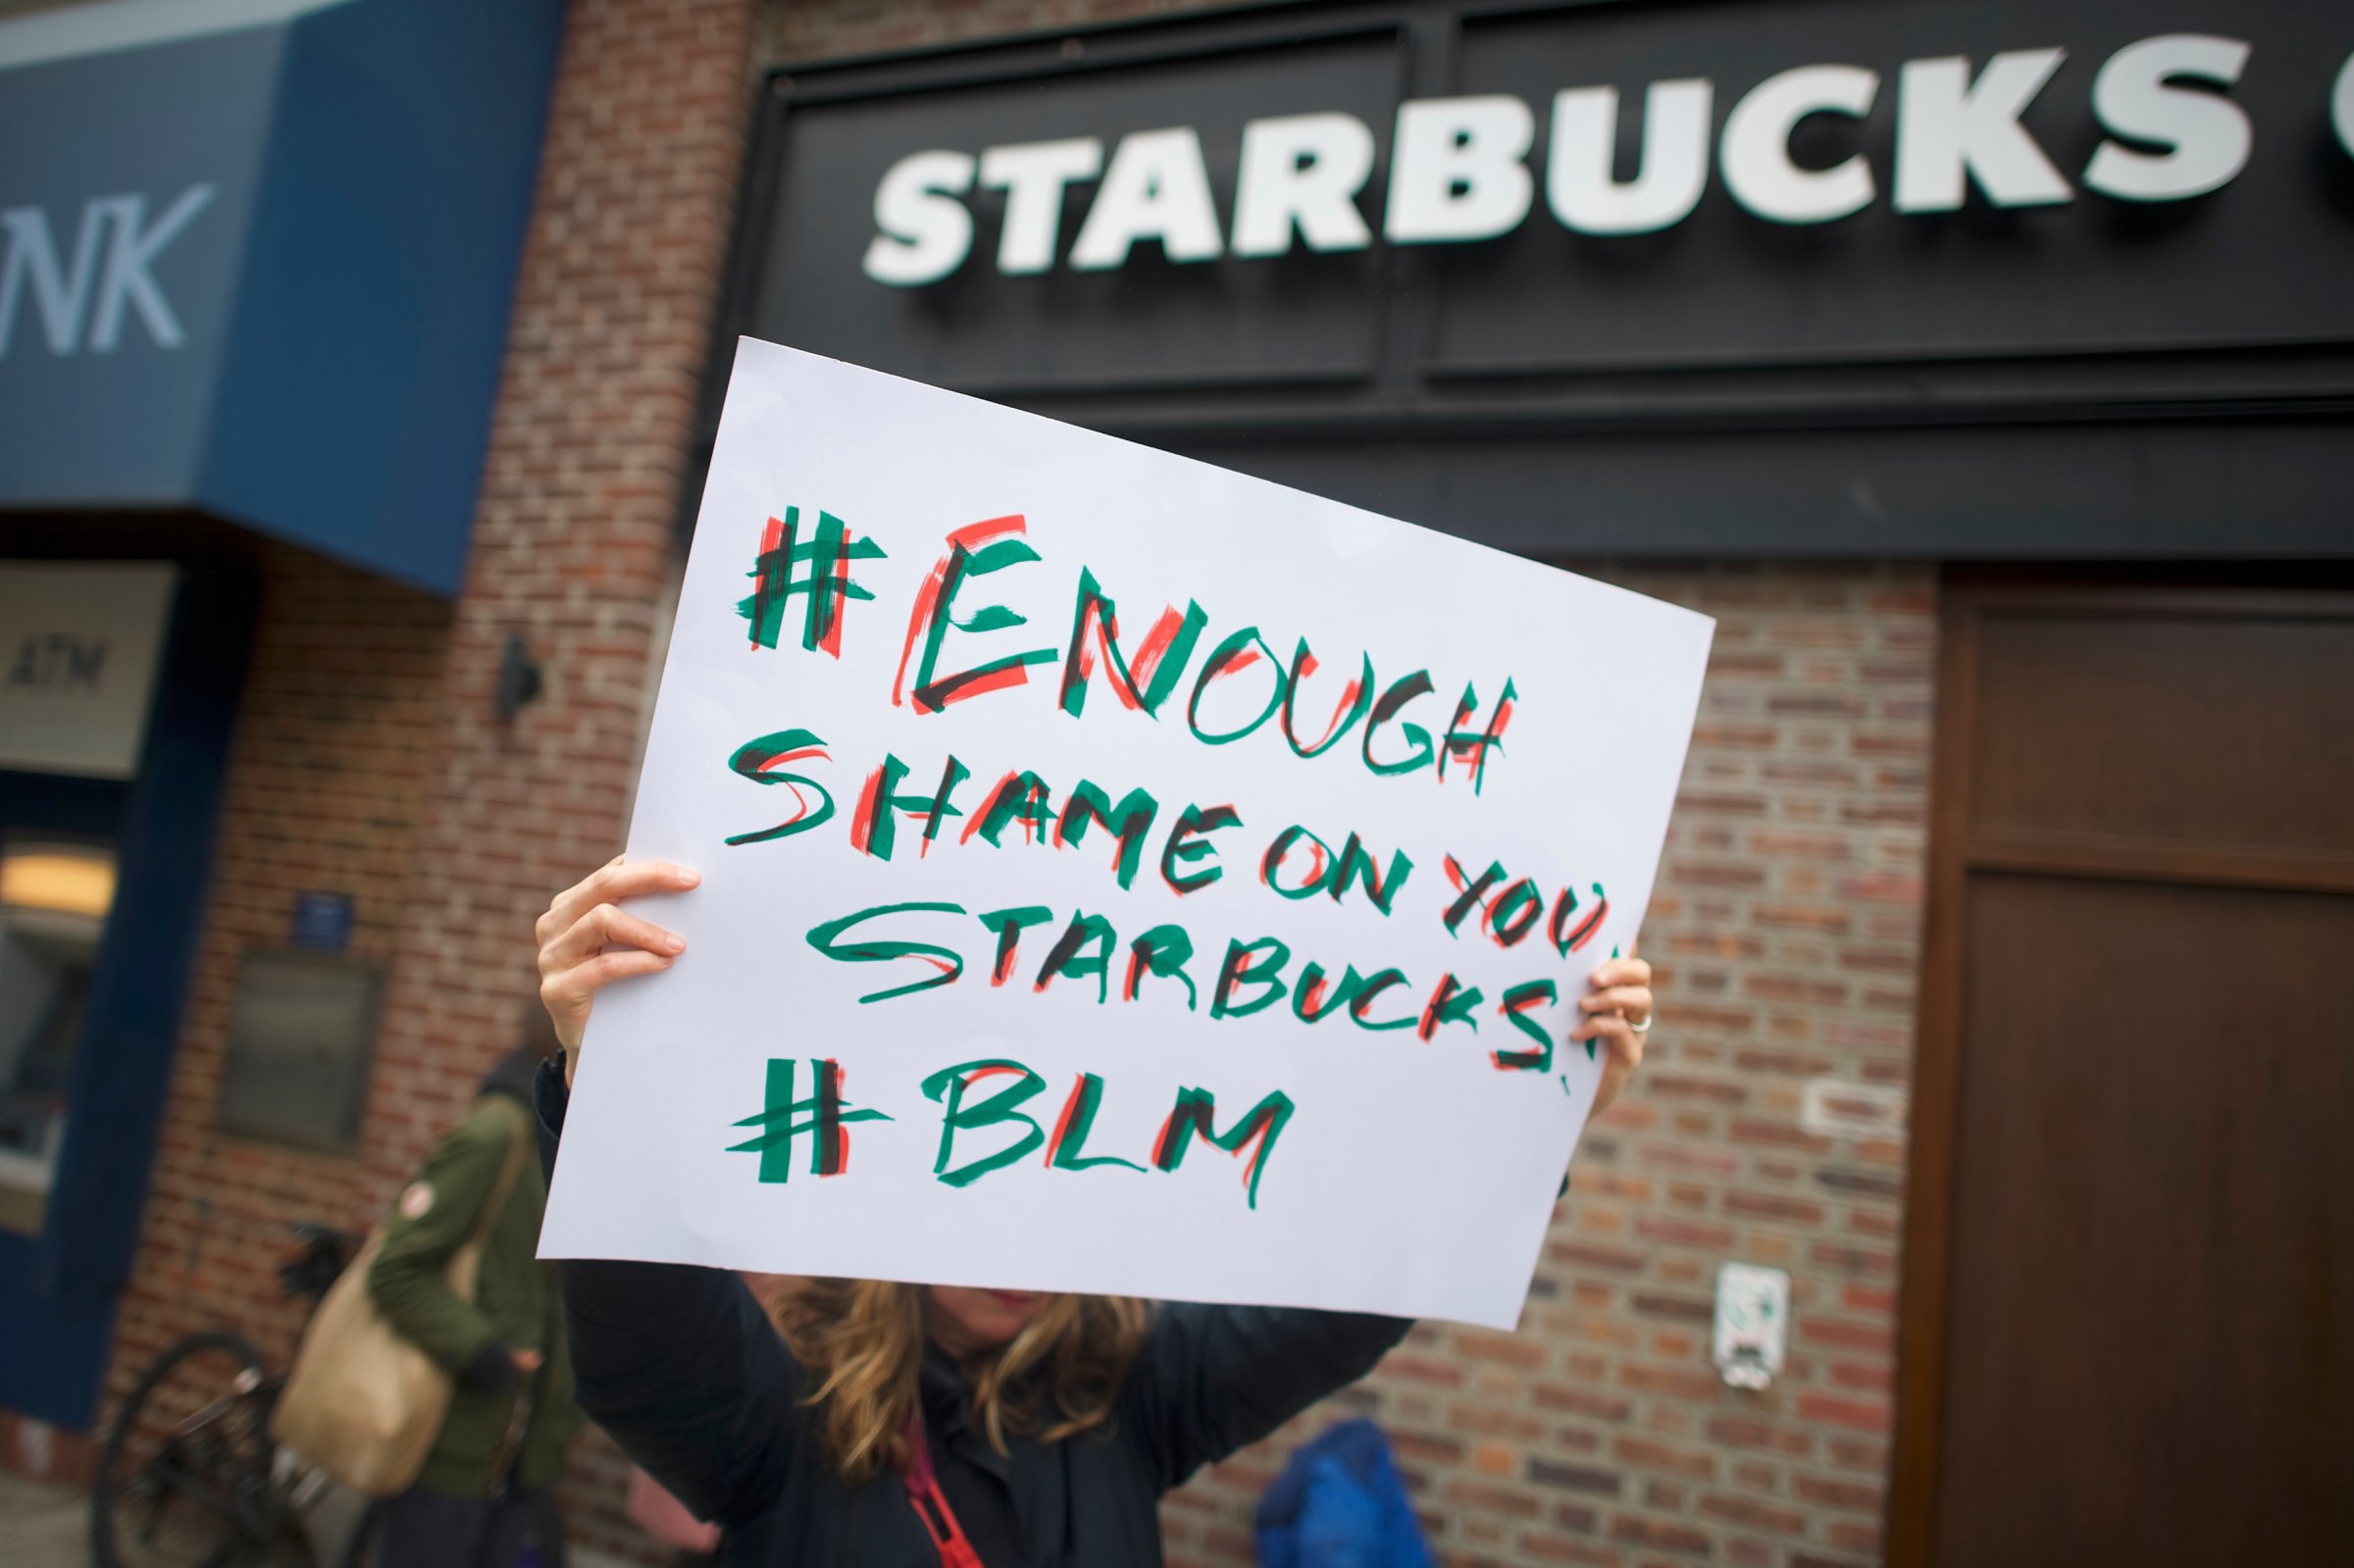 Philadelphia Police Arrest Of Two Black Men In Starbucks, Prompts Apology From Company's CEO